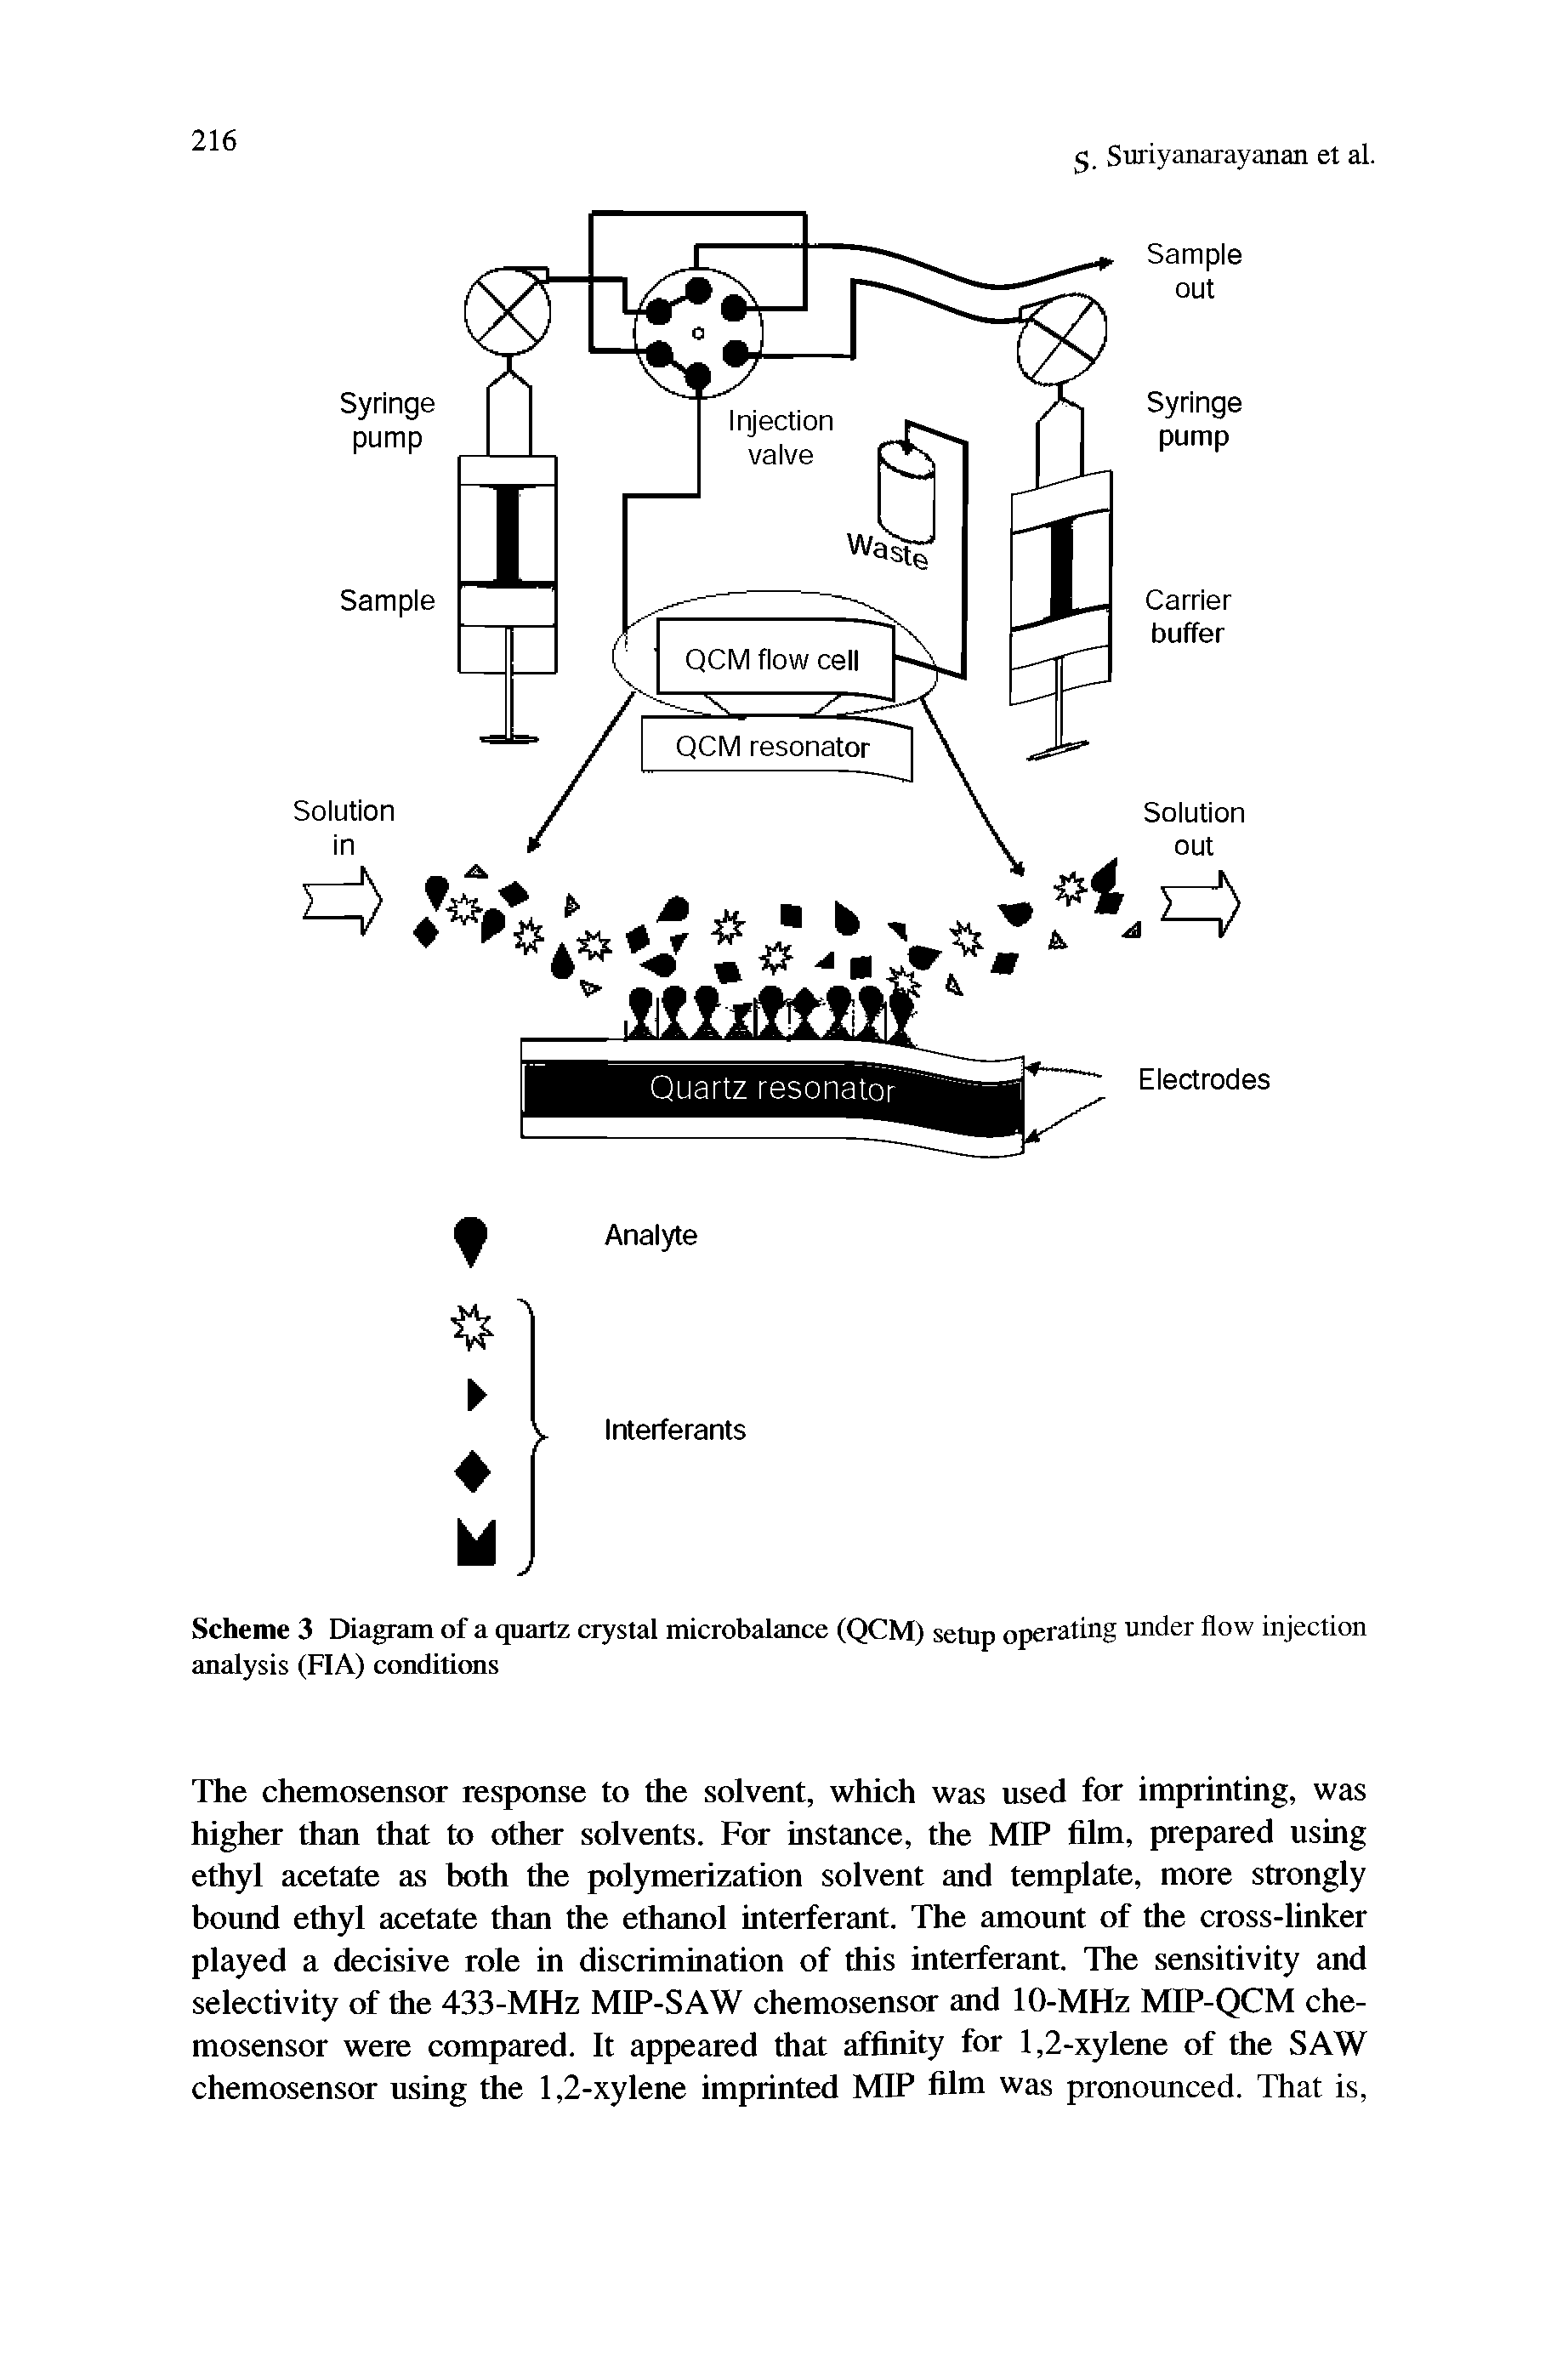 Scheme 3 Diagram of a quartz crystal microbalance (QCM) setup operating under flow injection analysis (FIA) conditions...